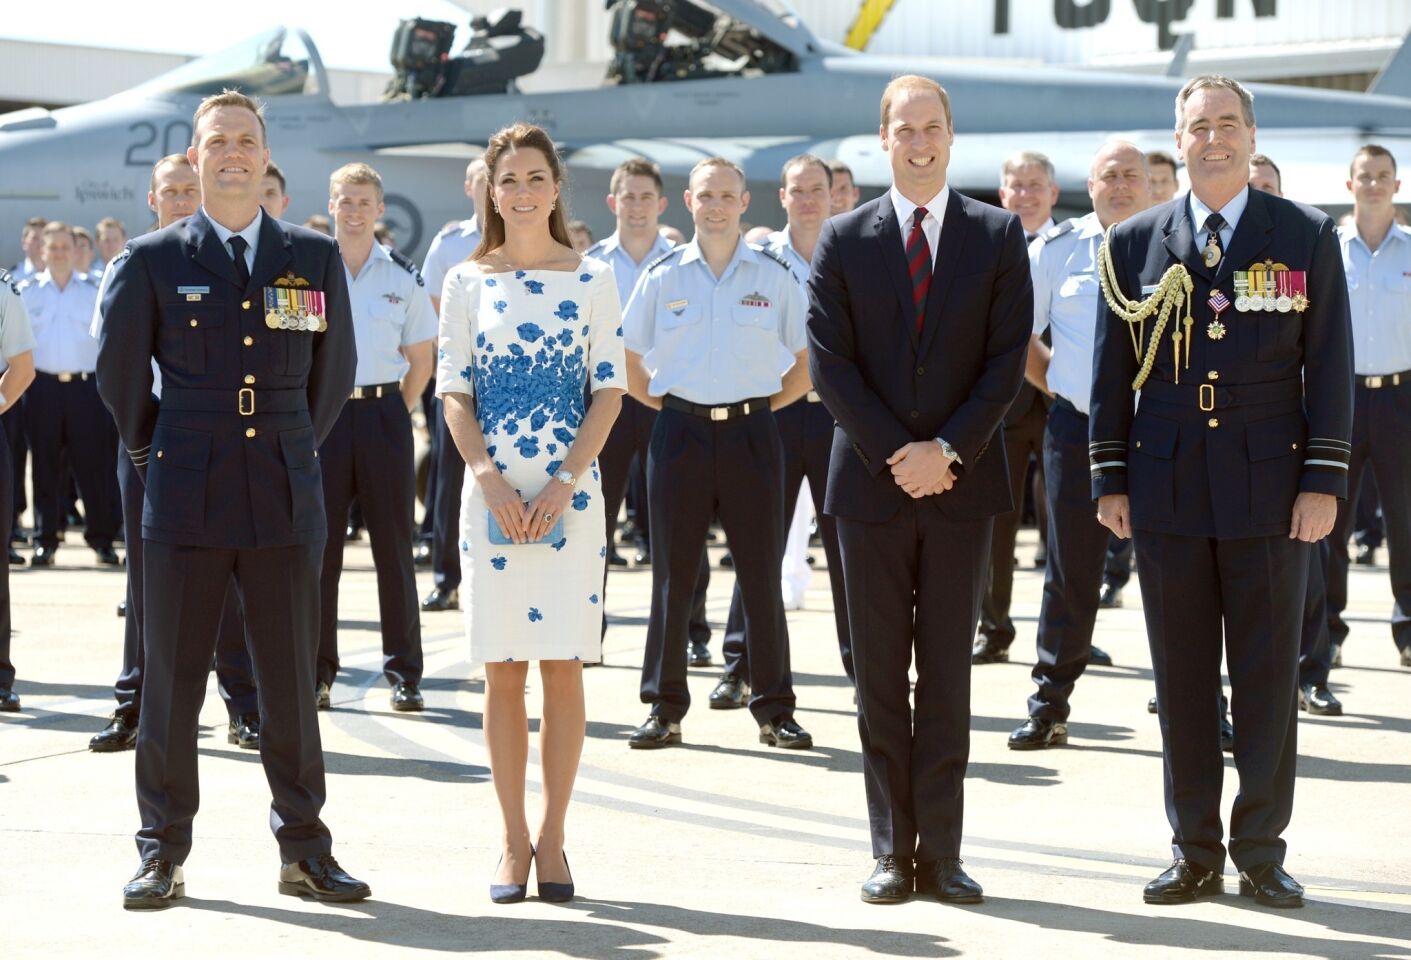 Catherine, duchess of Cambridge and Prince William, duke of Cambridge, arrive at the Royal Australian Air Force base at Amberley in Brisbane, Australia.